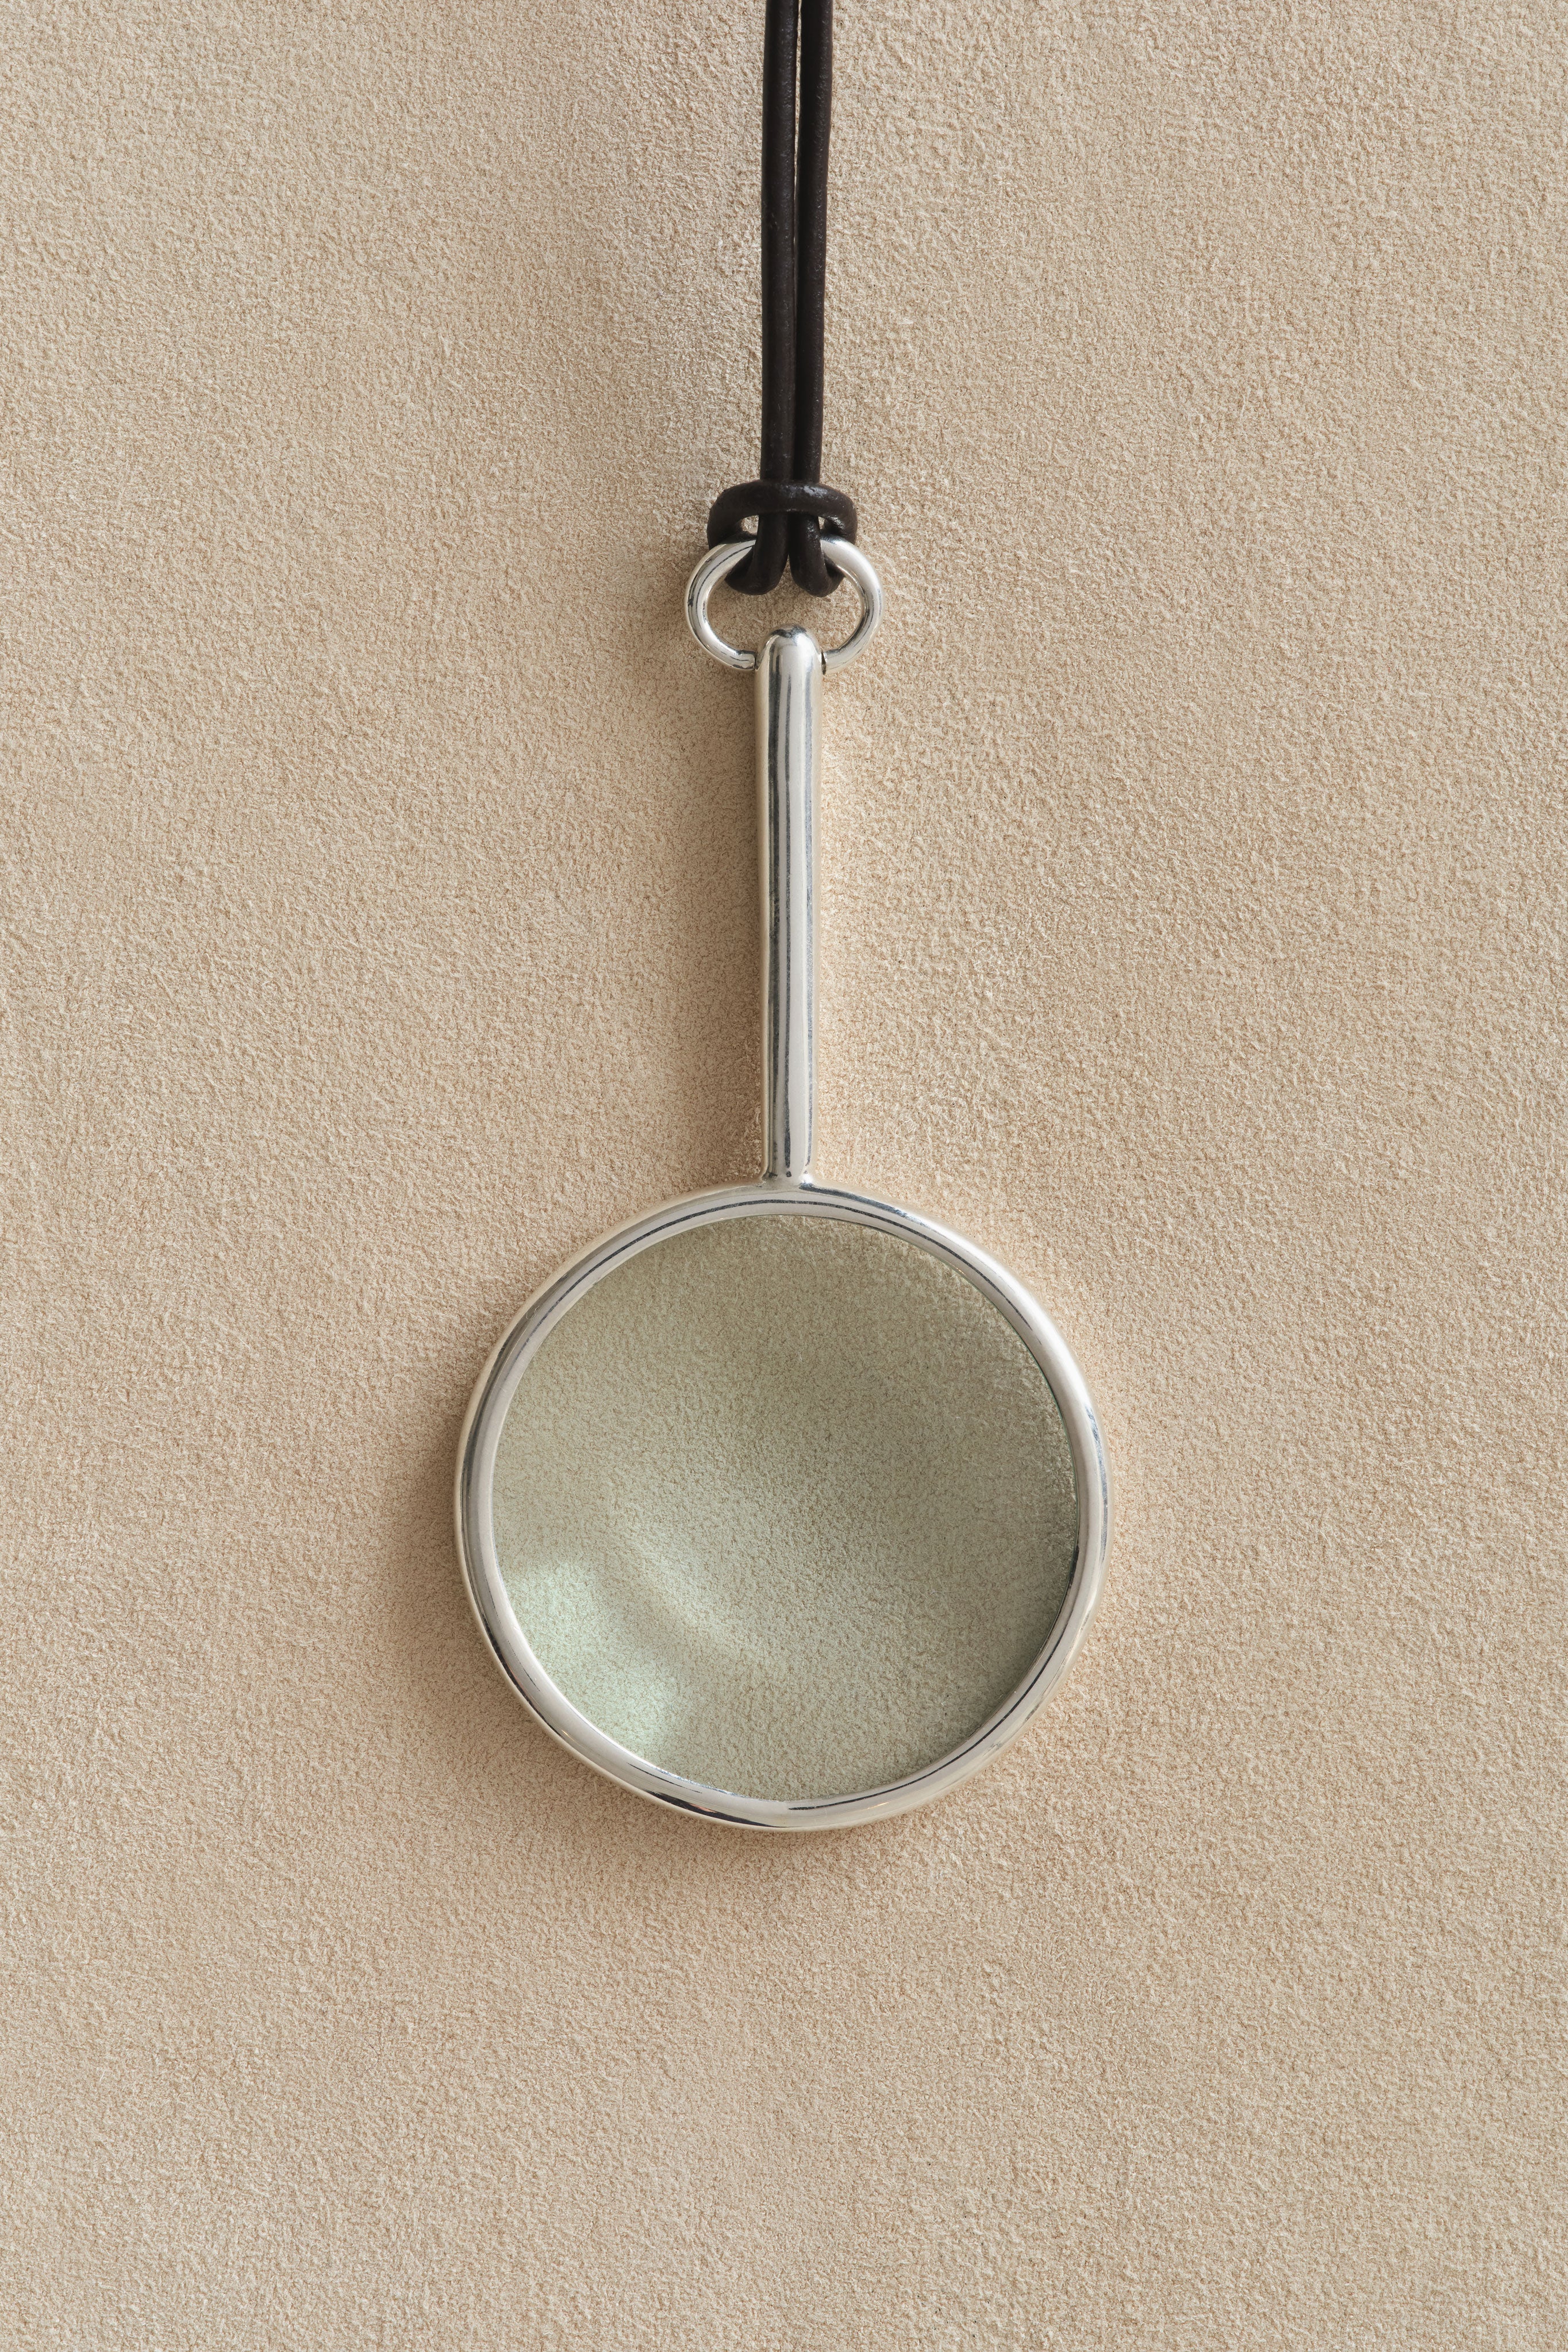 New Magnifier Magnifying Glass Creative Pendant Necklace Sweater Chain F  US7